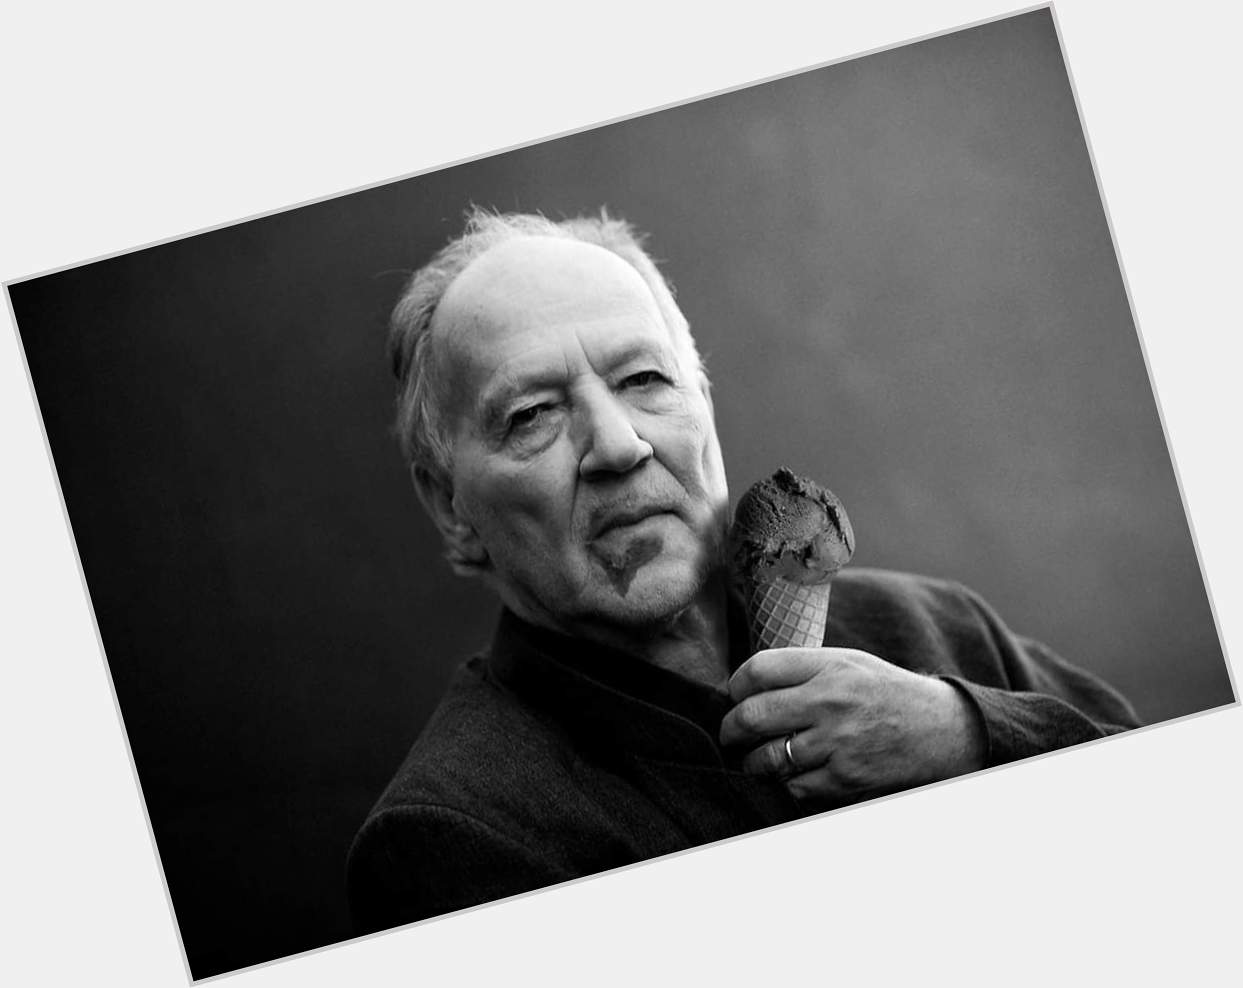 \"civilization is like a thin veneer of ice upon a deep ocean of chaos and darkness.\" happy birthday Werner Herzog! 